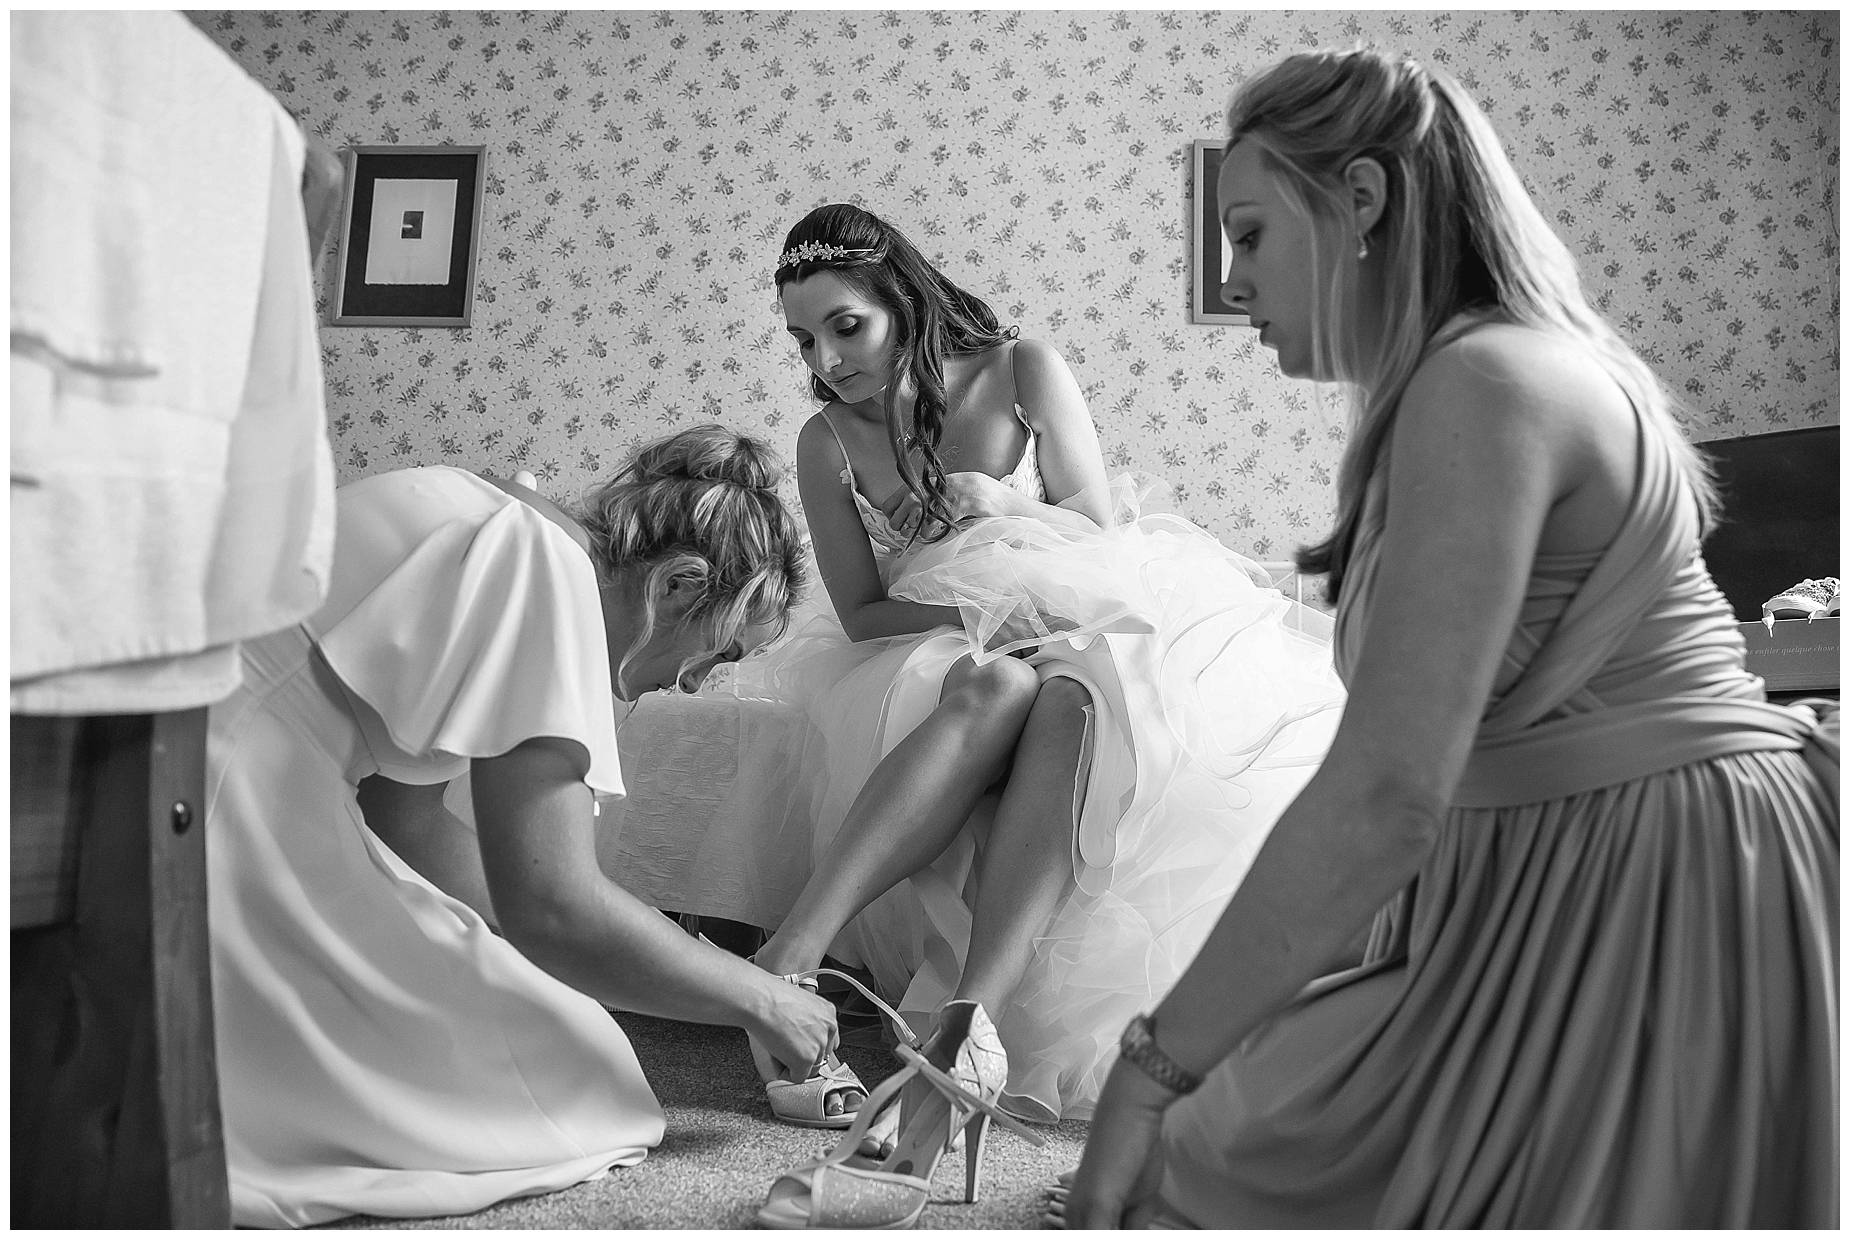 shoes being put on bride